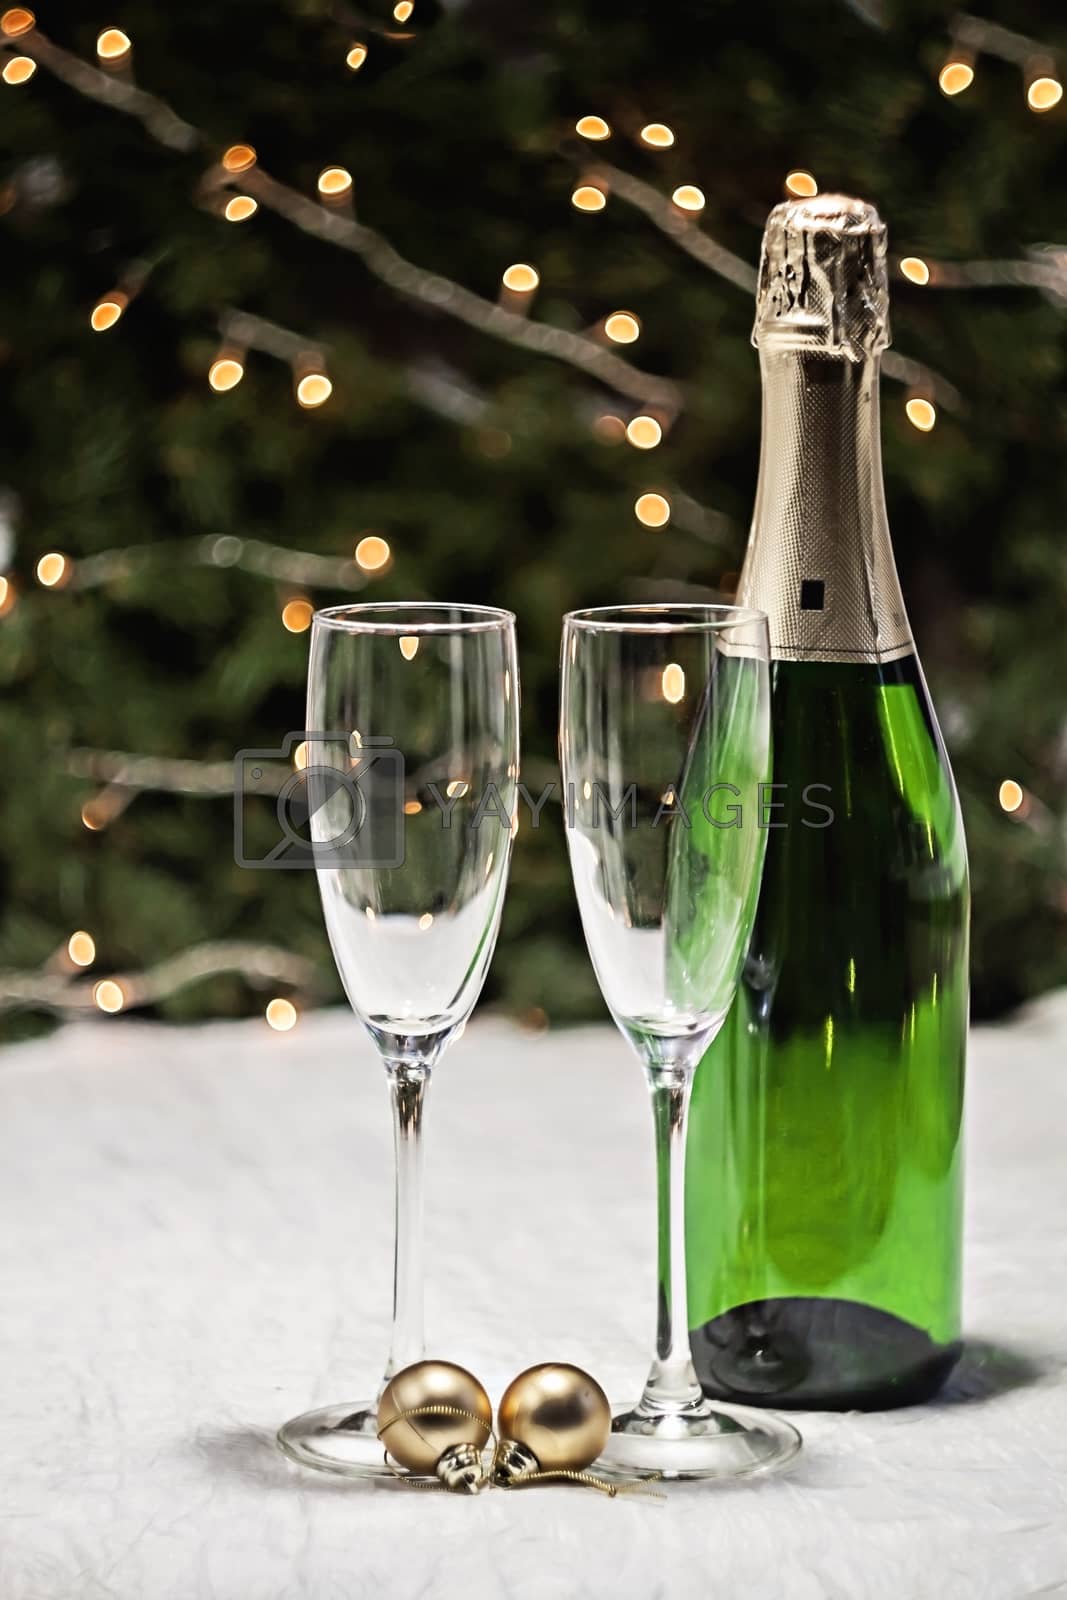 Royalty free image of two glasses and a bottle of champagne is on a festive tablecloth by Tanacha